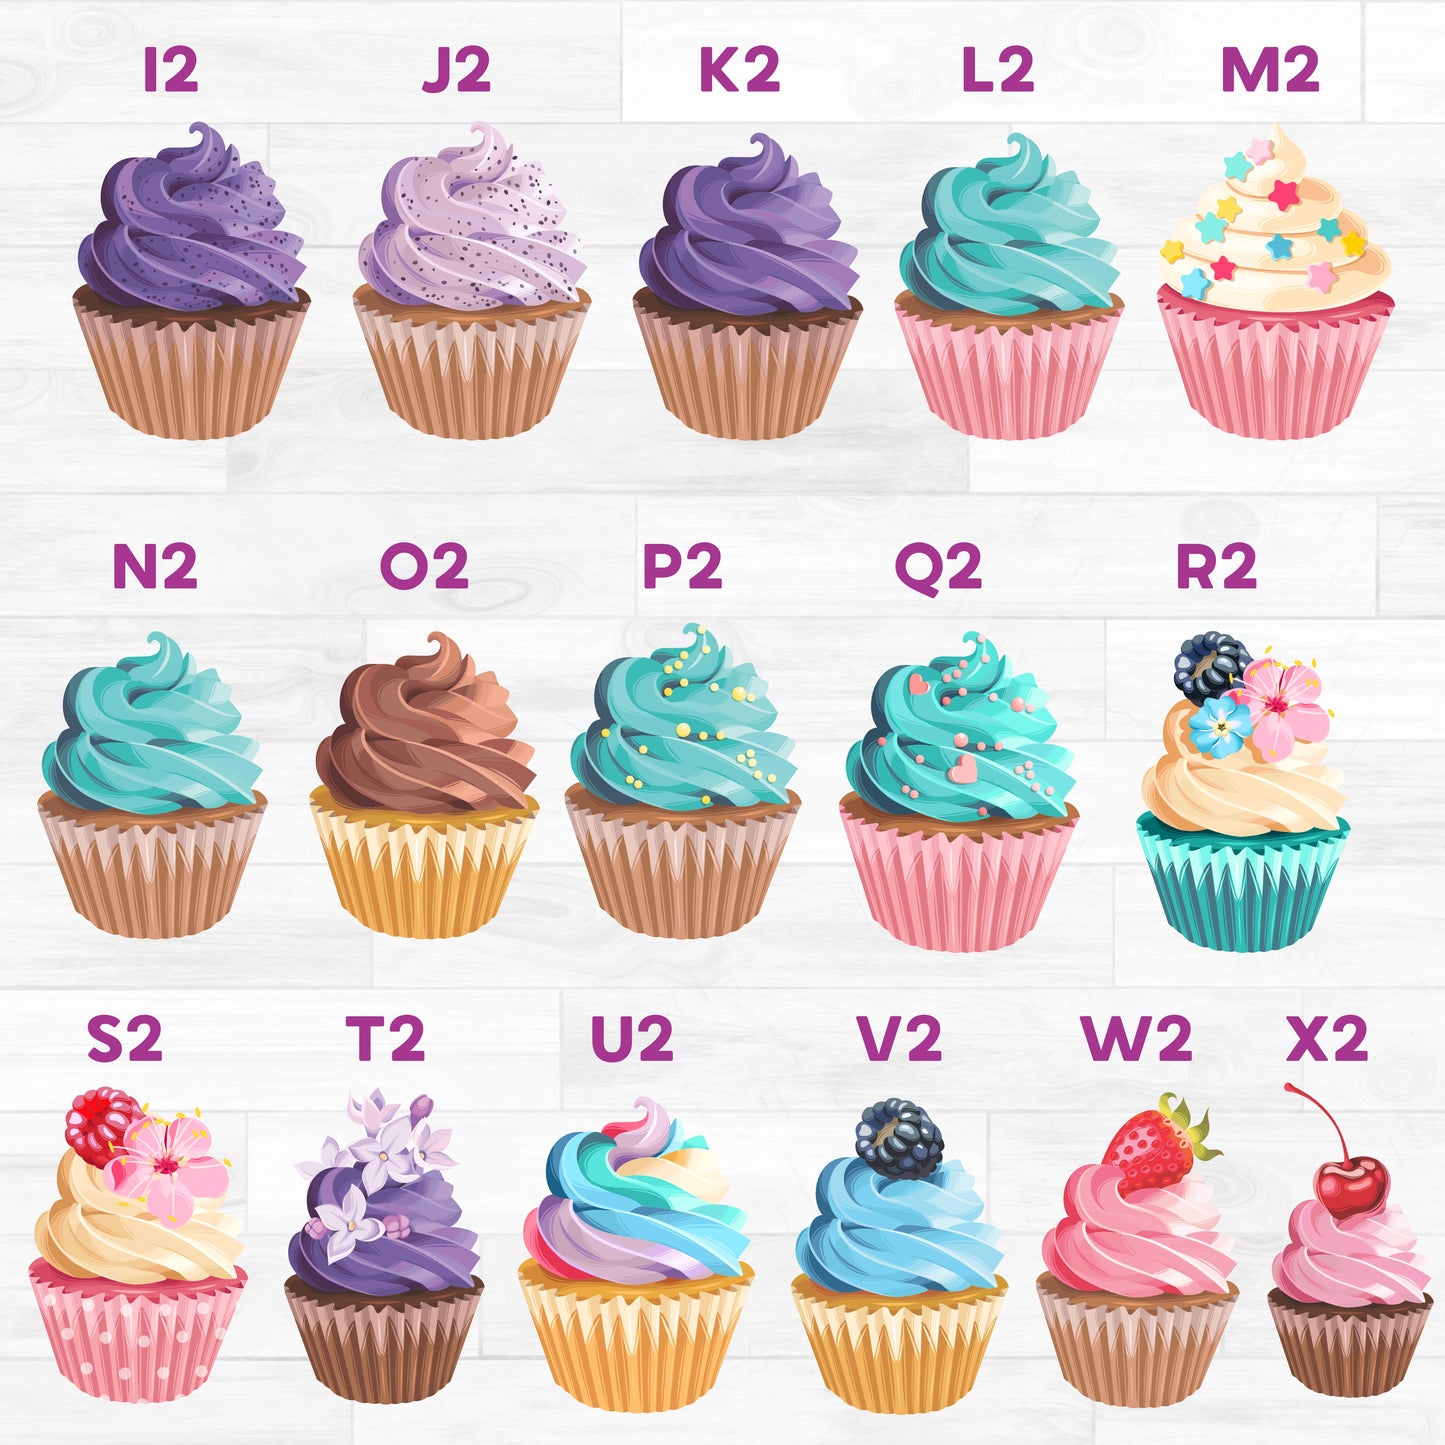 SBS-275-7 Cupcake Family of the Sweet One Custom Text Made-to-Order Iron-On Transfer or Sticker